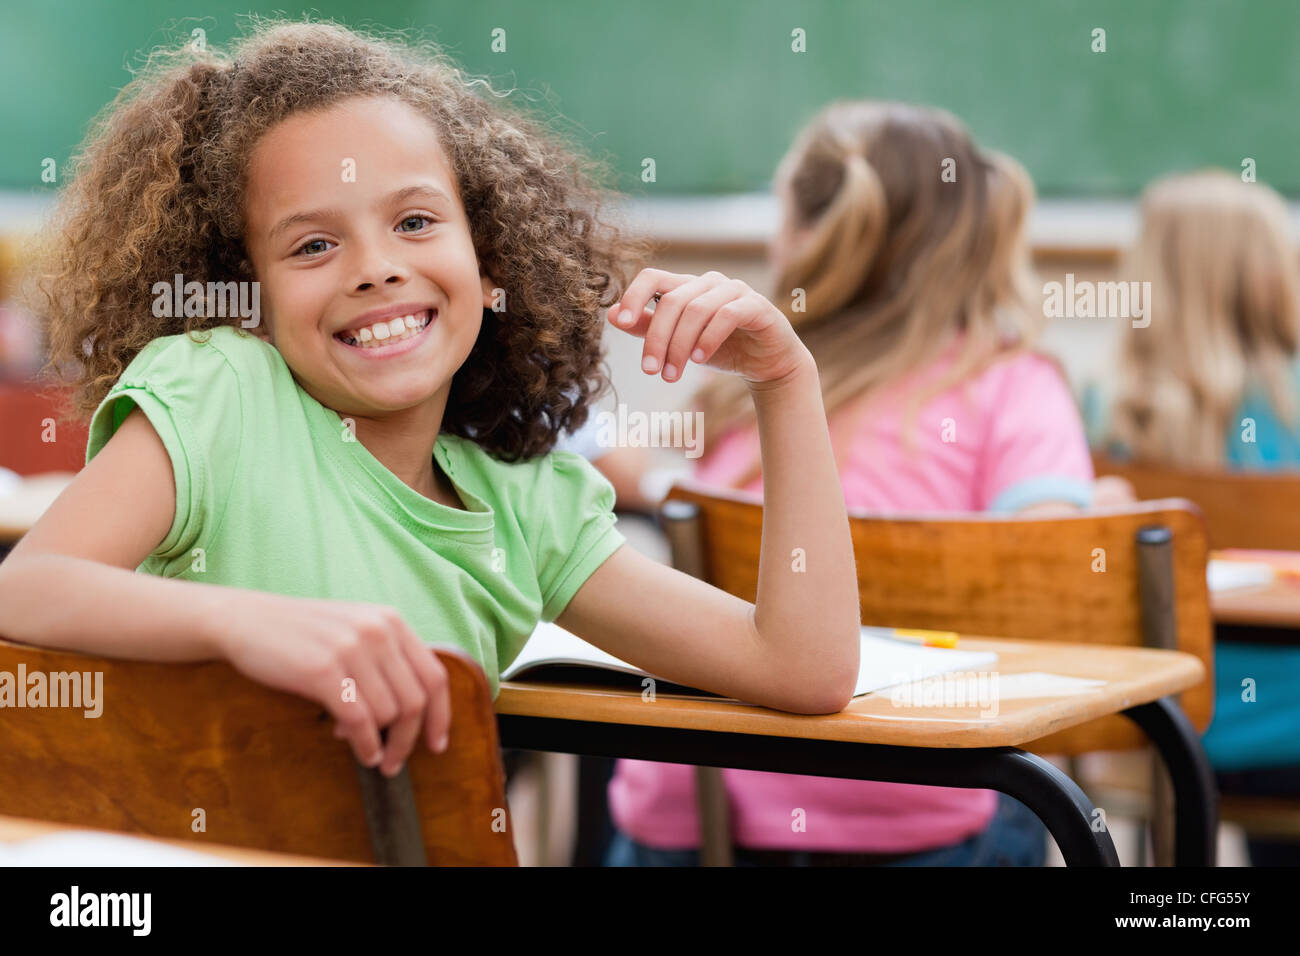 Happy girl turned around during class Stock Photo